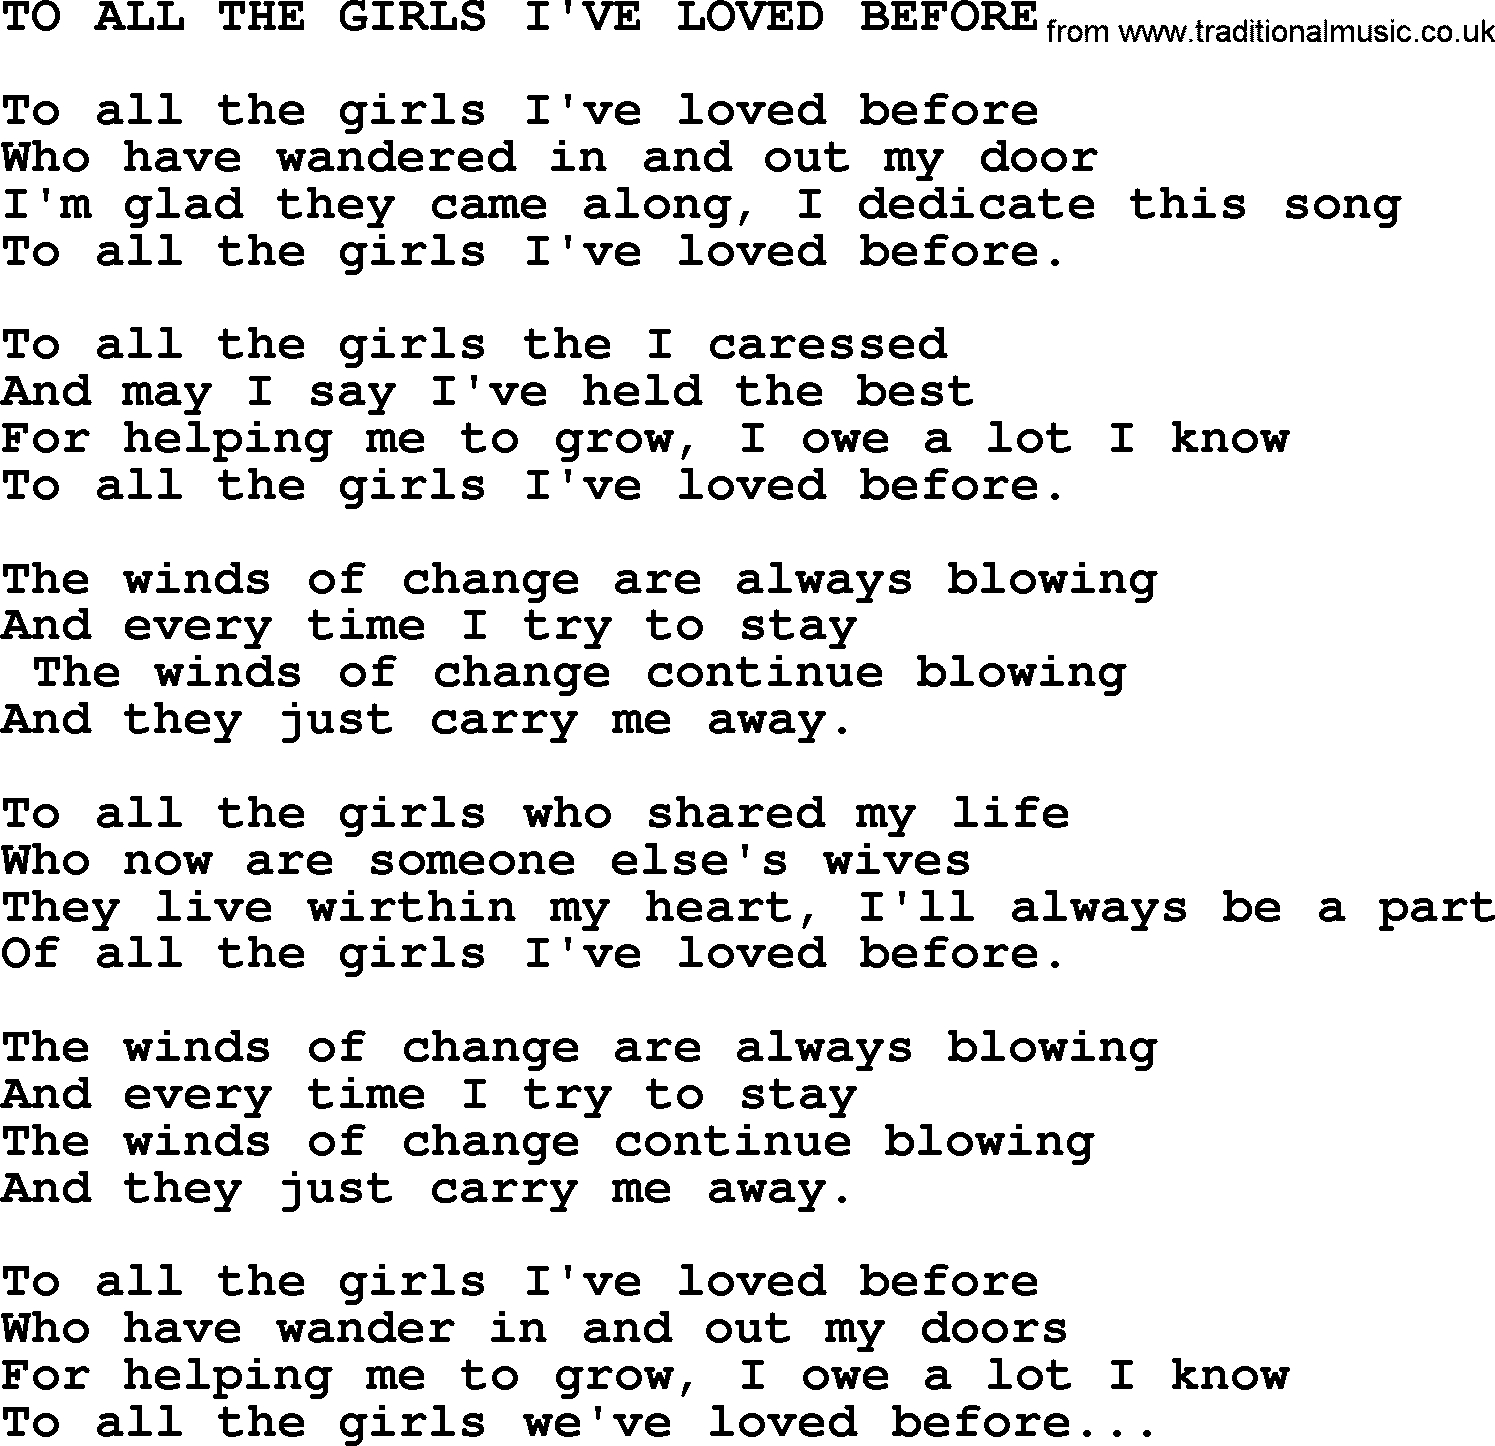 Merle Haggard song: To All The Girls I've Loved Before, lyrics.